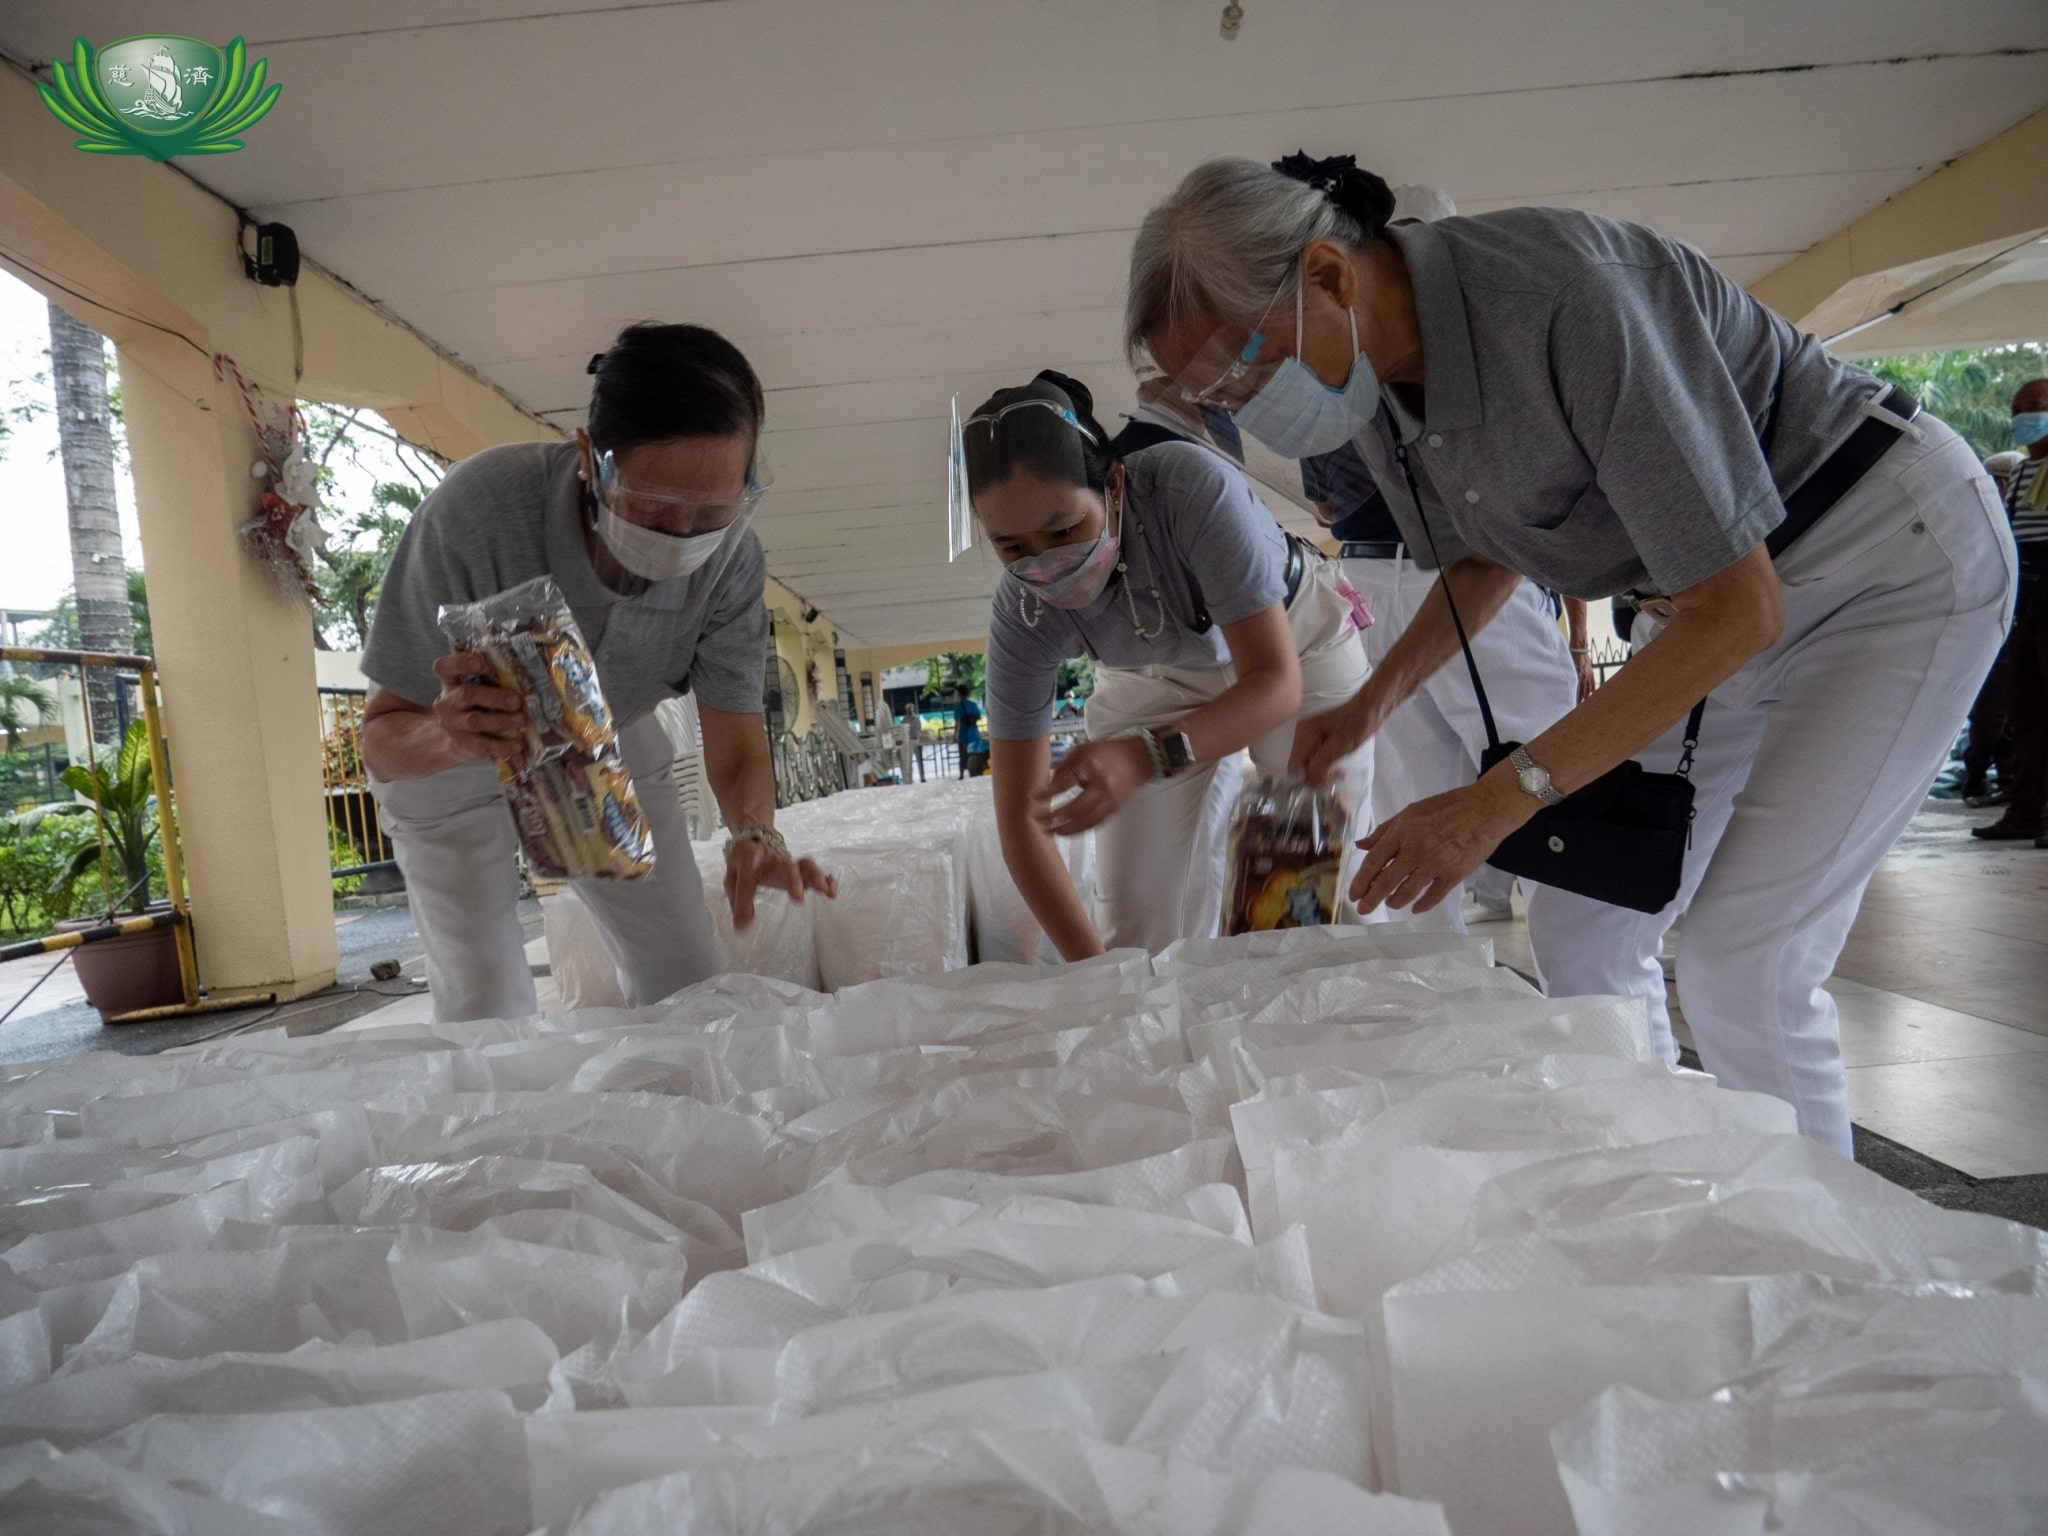 Volunteers prepare bags of groceries to be claimed by the day’s beneficiaries. 【Photo by Jeaneal Dando】